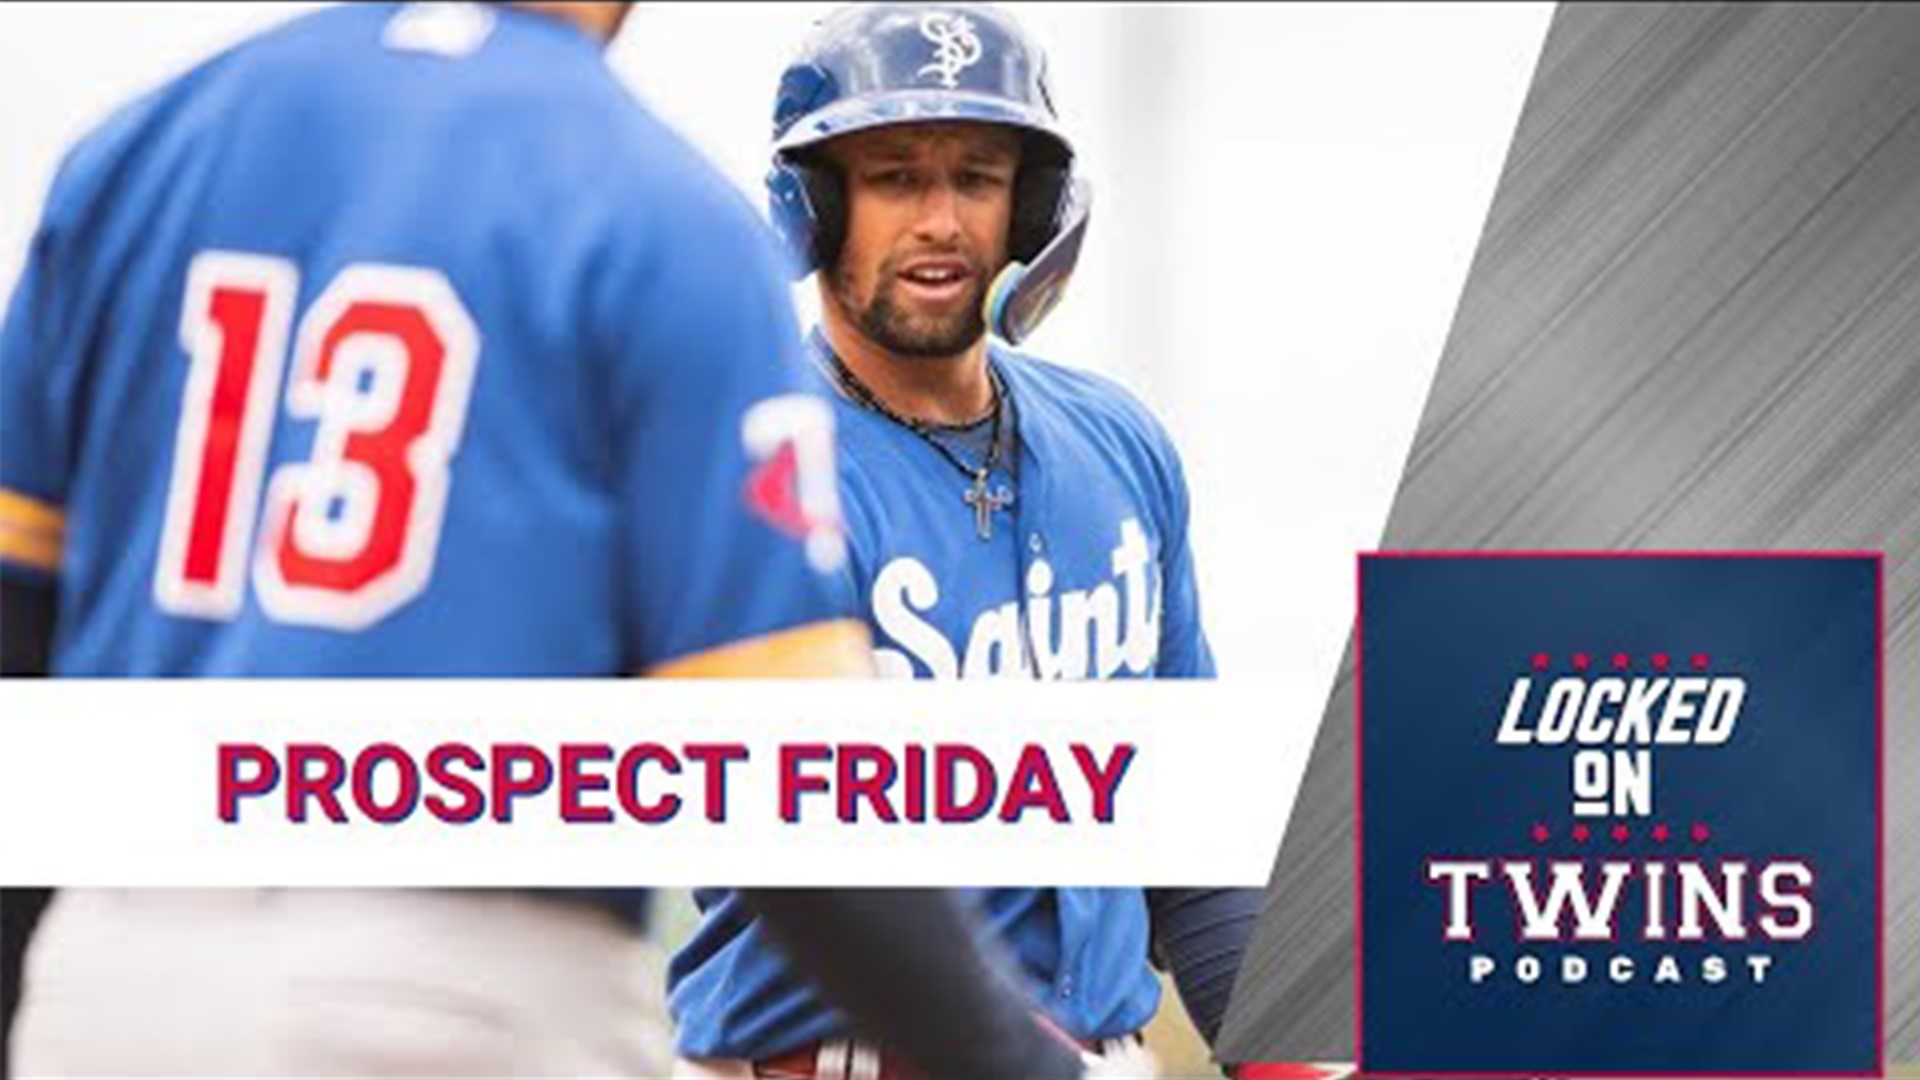 Prospect Friday is back for another year! On this edition, we highlight the Royce Lewis breakout, Simeon Woods Richardson dominating at Double-A and so much more.